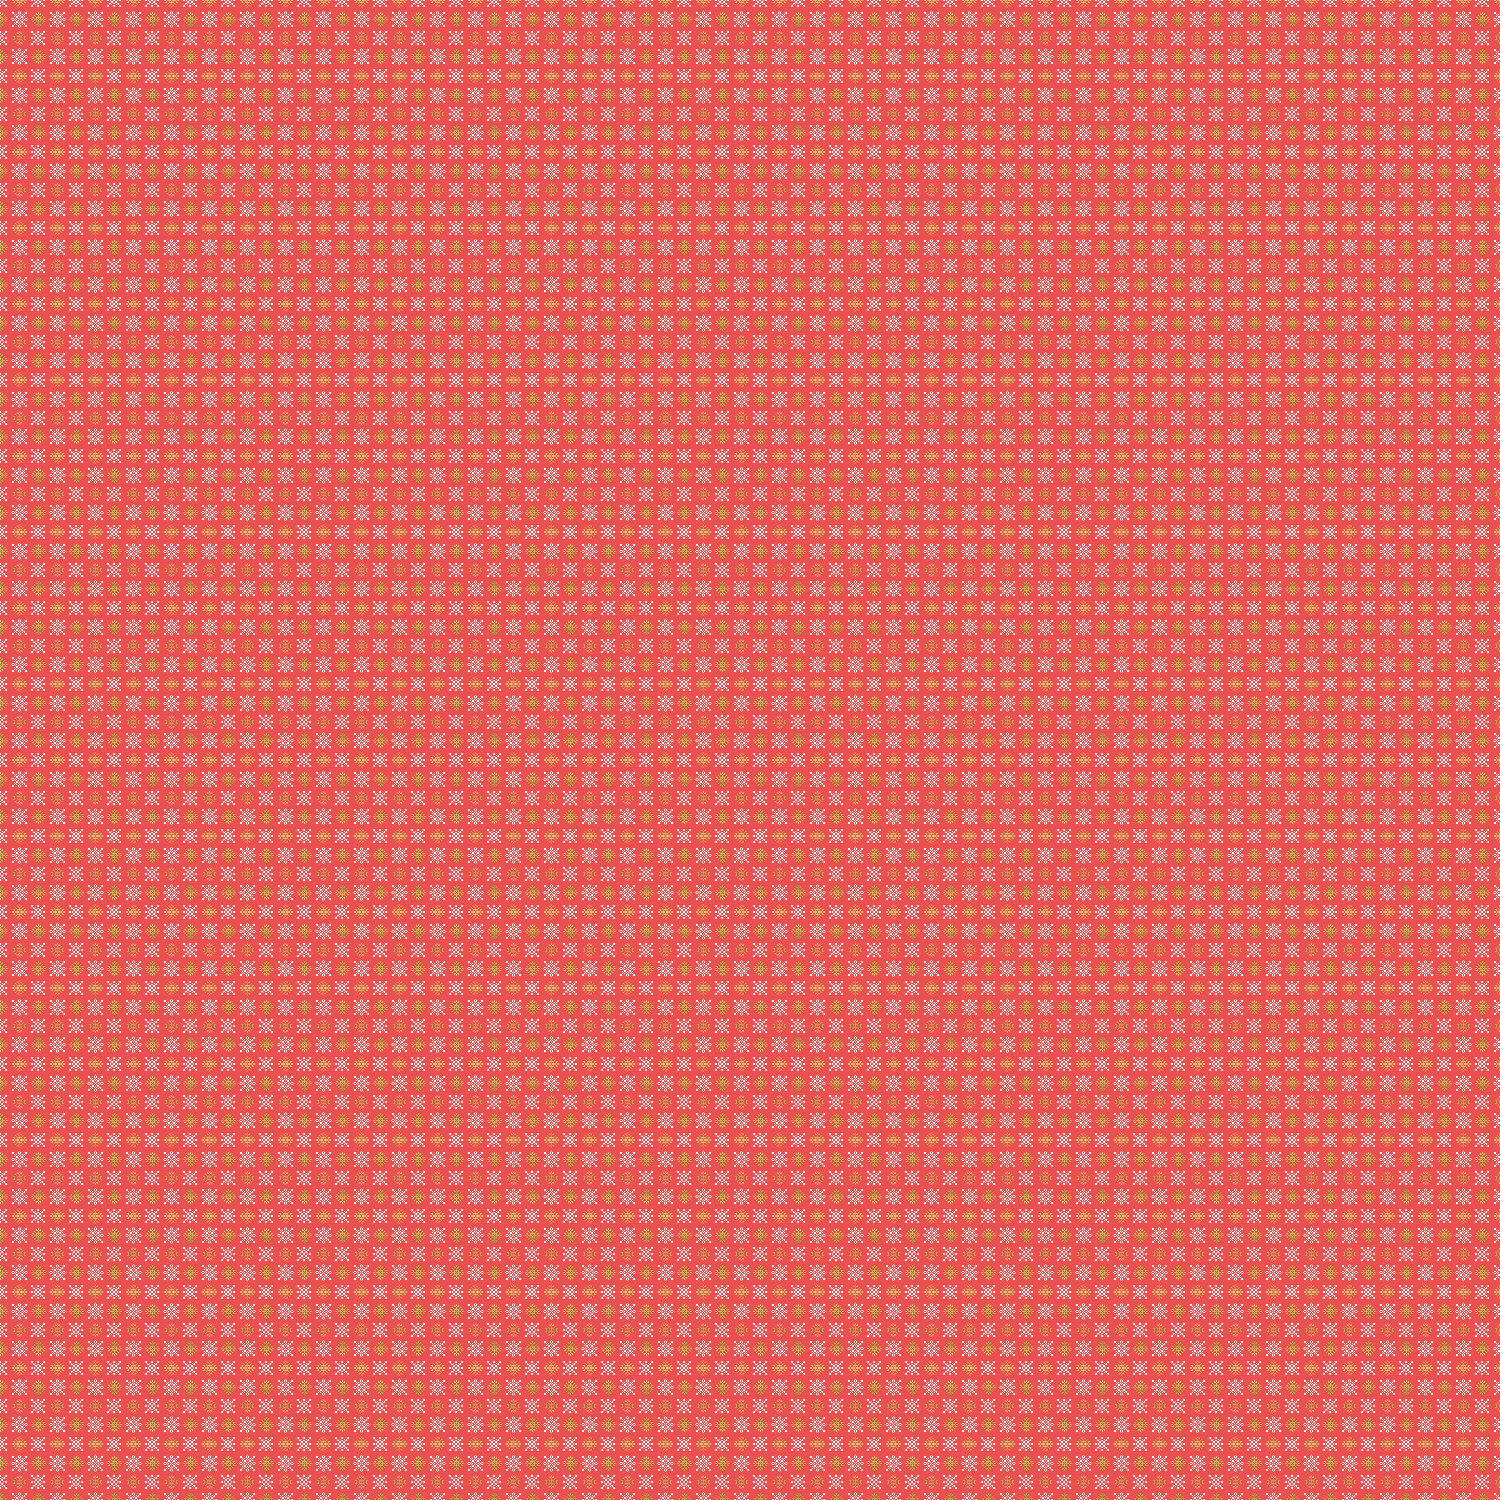 Red Hd Christmas Patterns